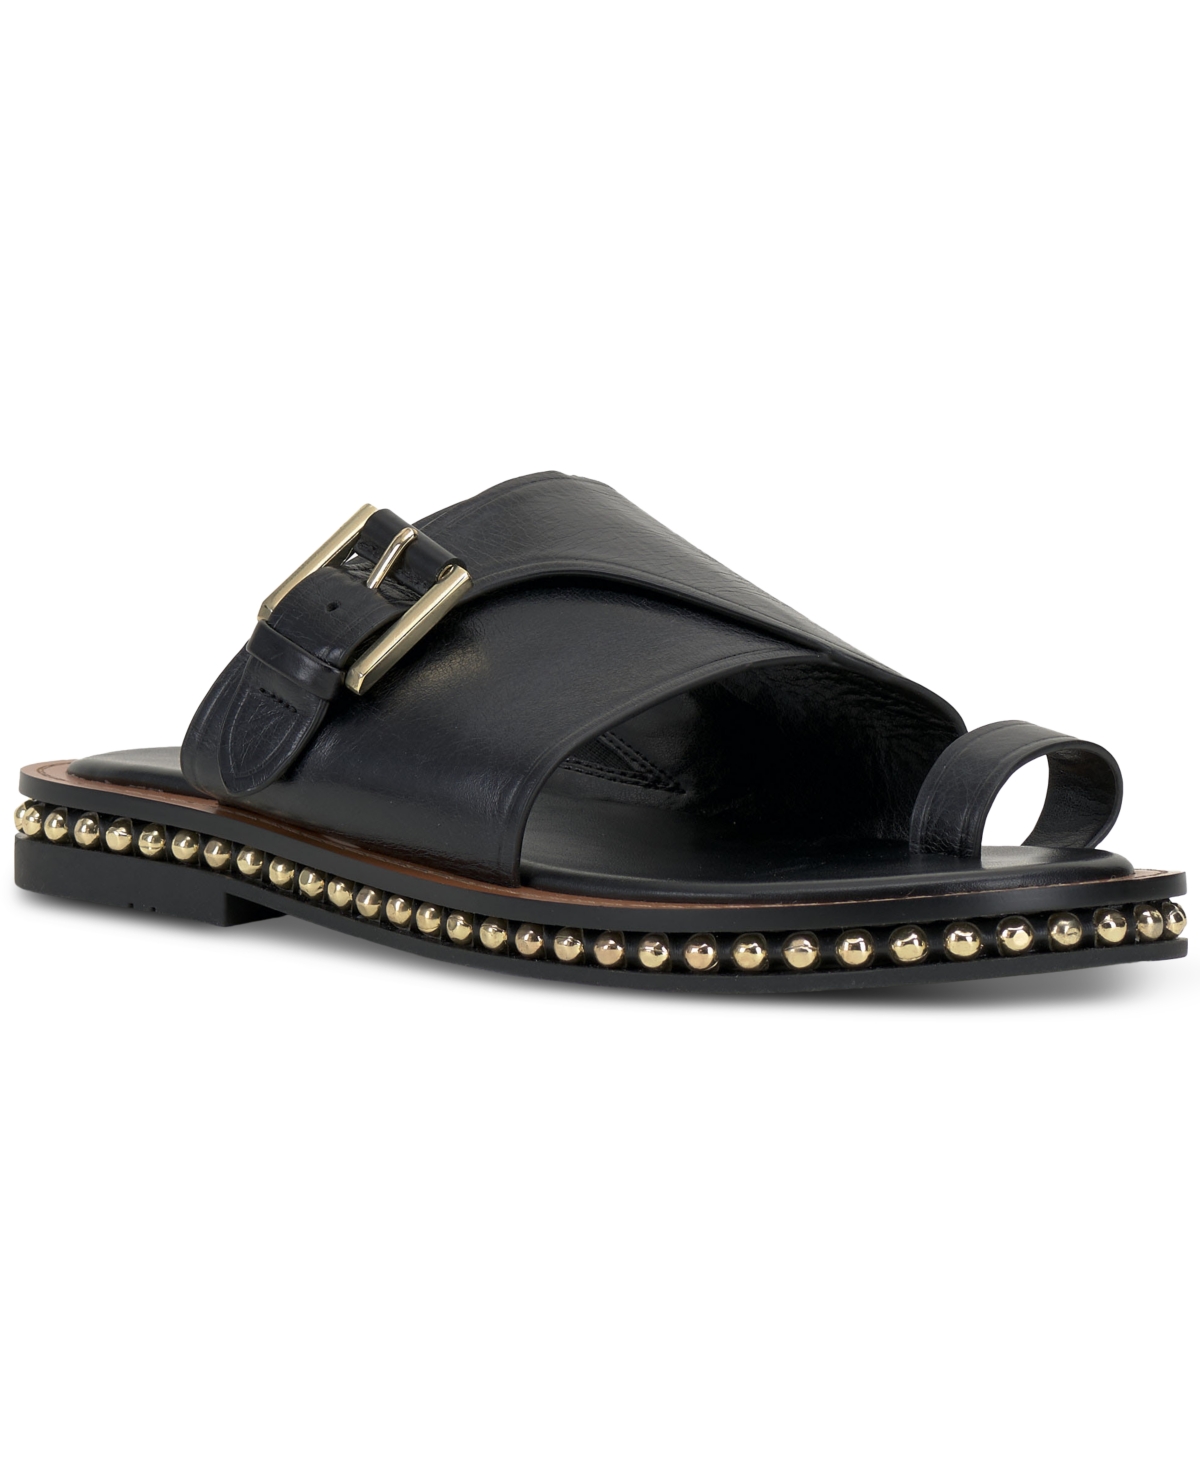 UPC 196672387416 product image for Vince Camuto Women's Cooliann Hooded Thong Flat Sandals Women's Shoes | upcitemdb.com